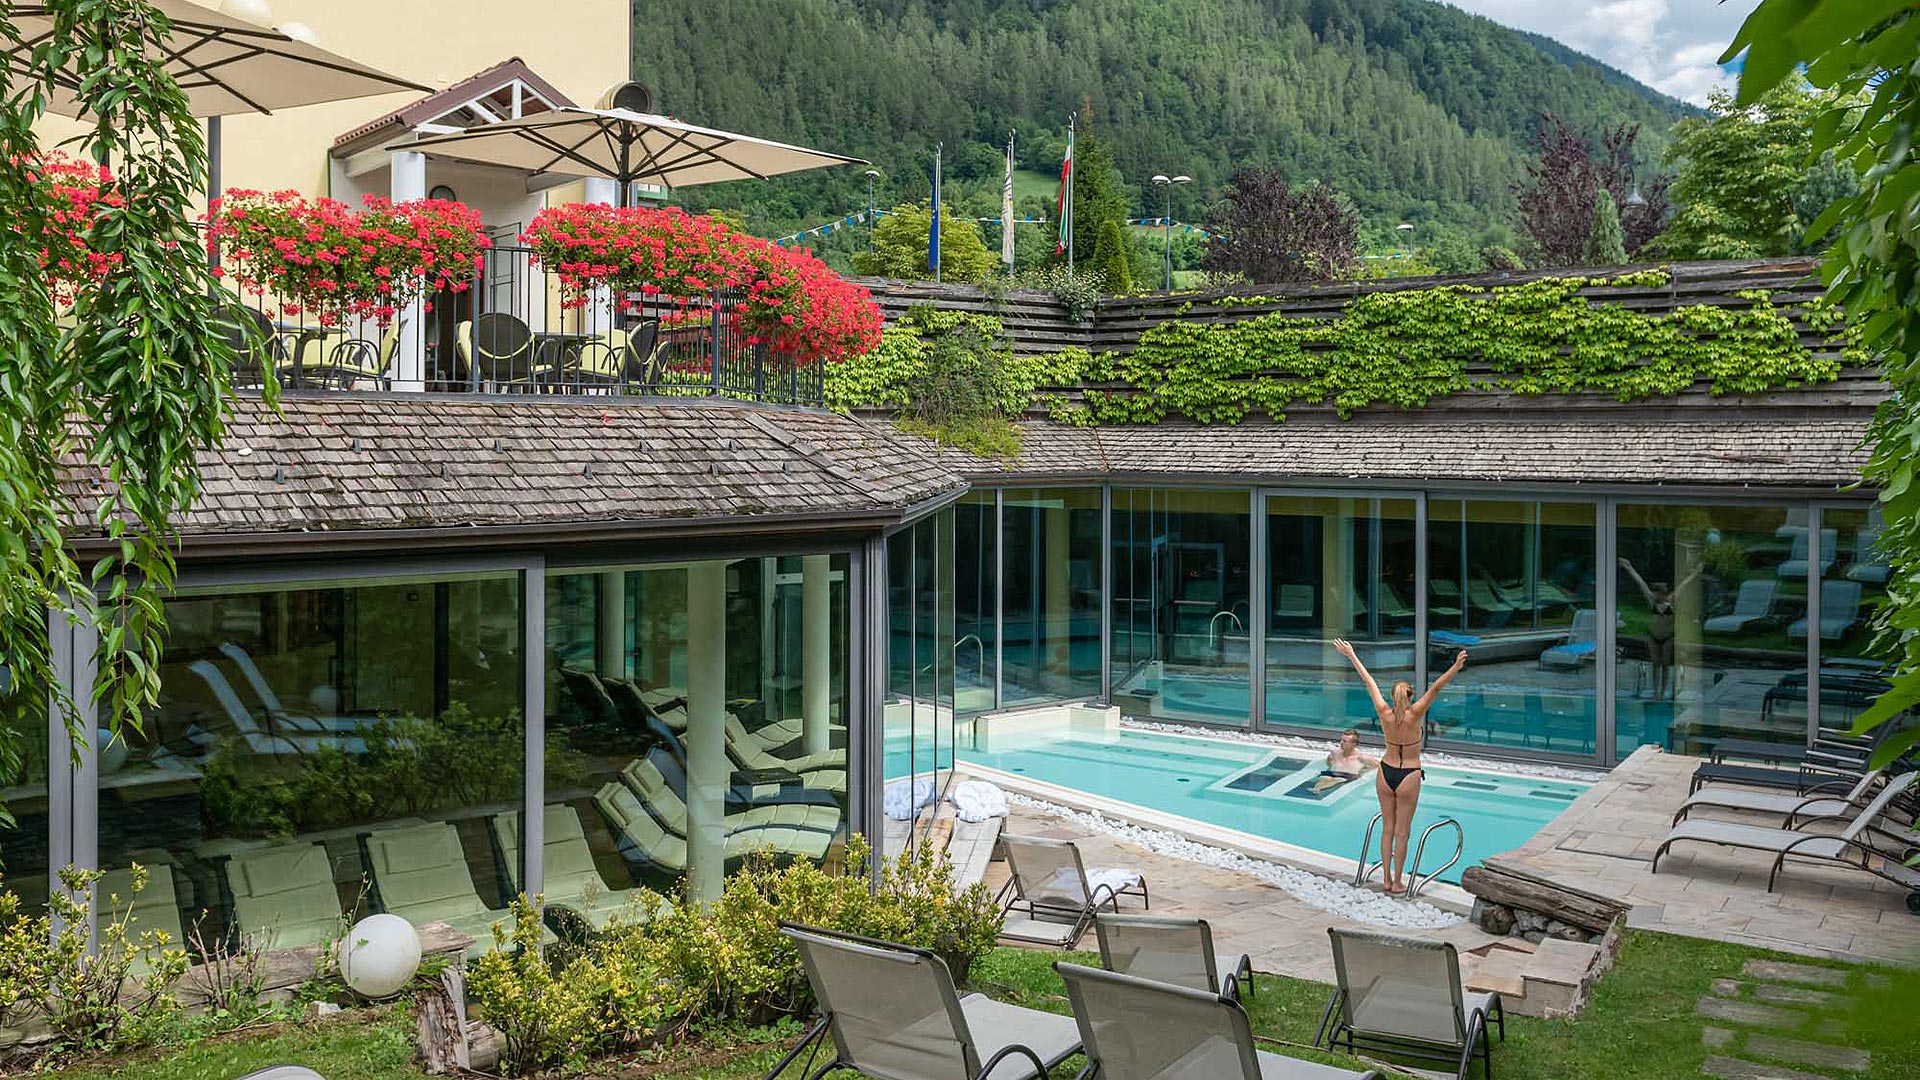 In Trentino, the AlpHoliday is a Family Hotel with SPA ideal for your psychophysical well-being.